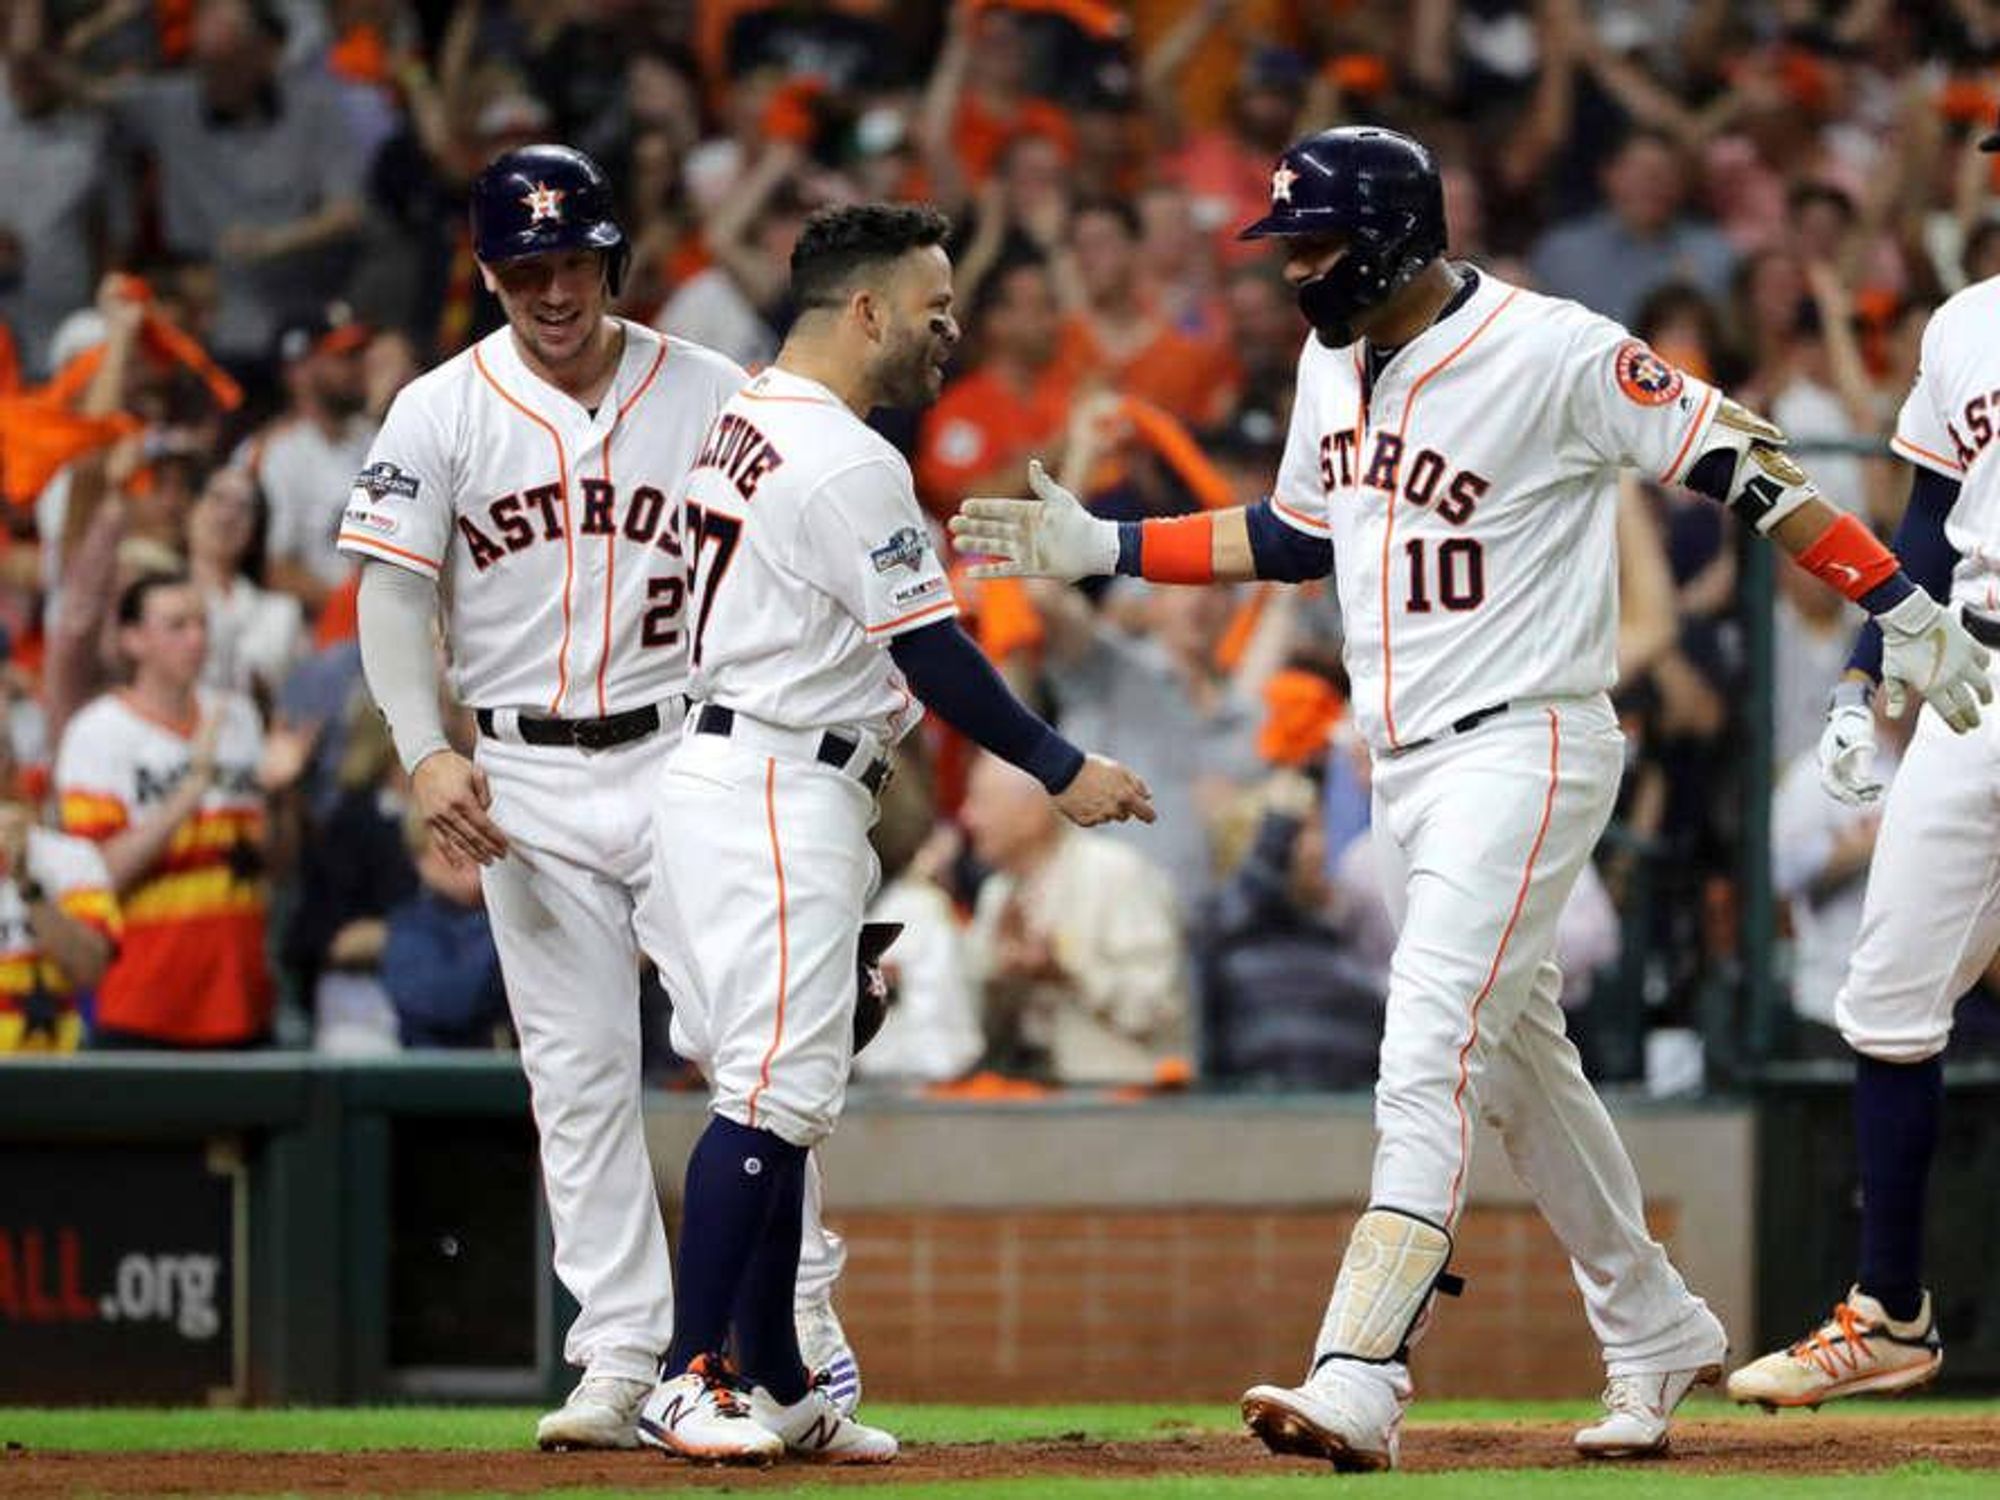 World Series: Houston Astros set a record for merchandise sales